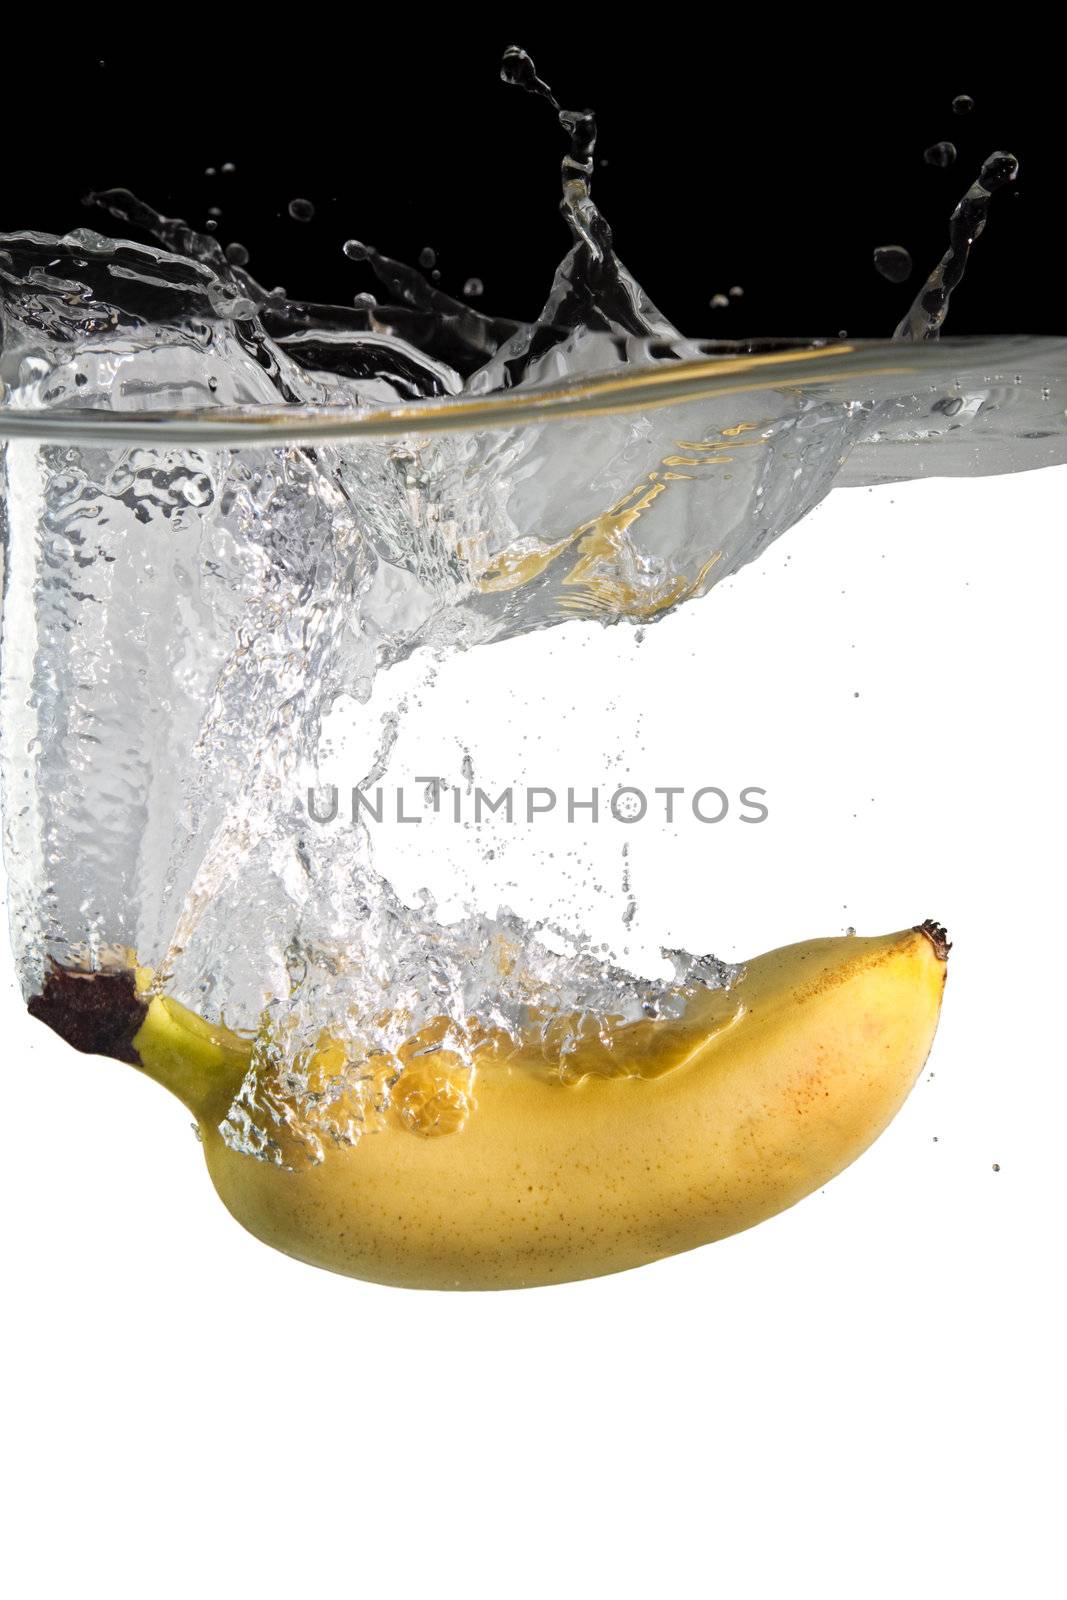 banana thrown in water with black and white background